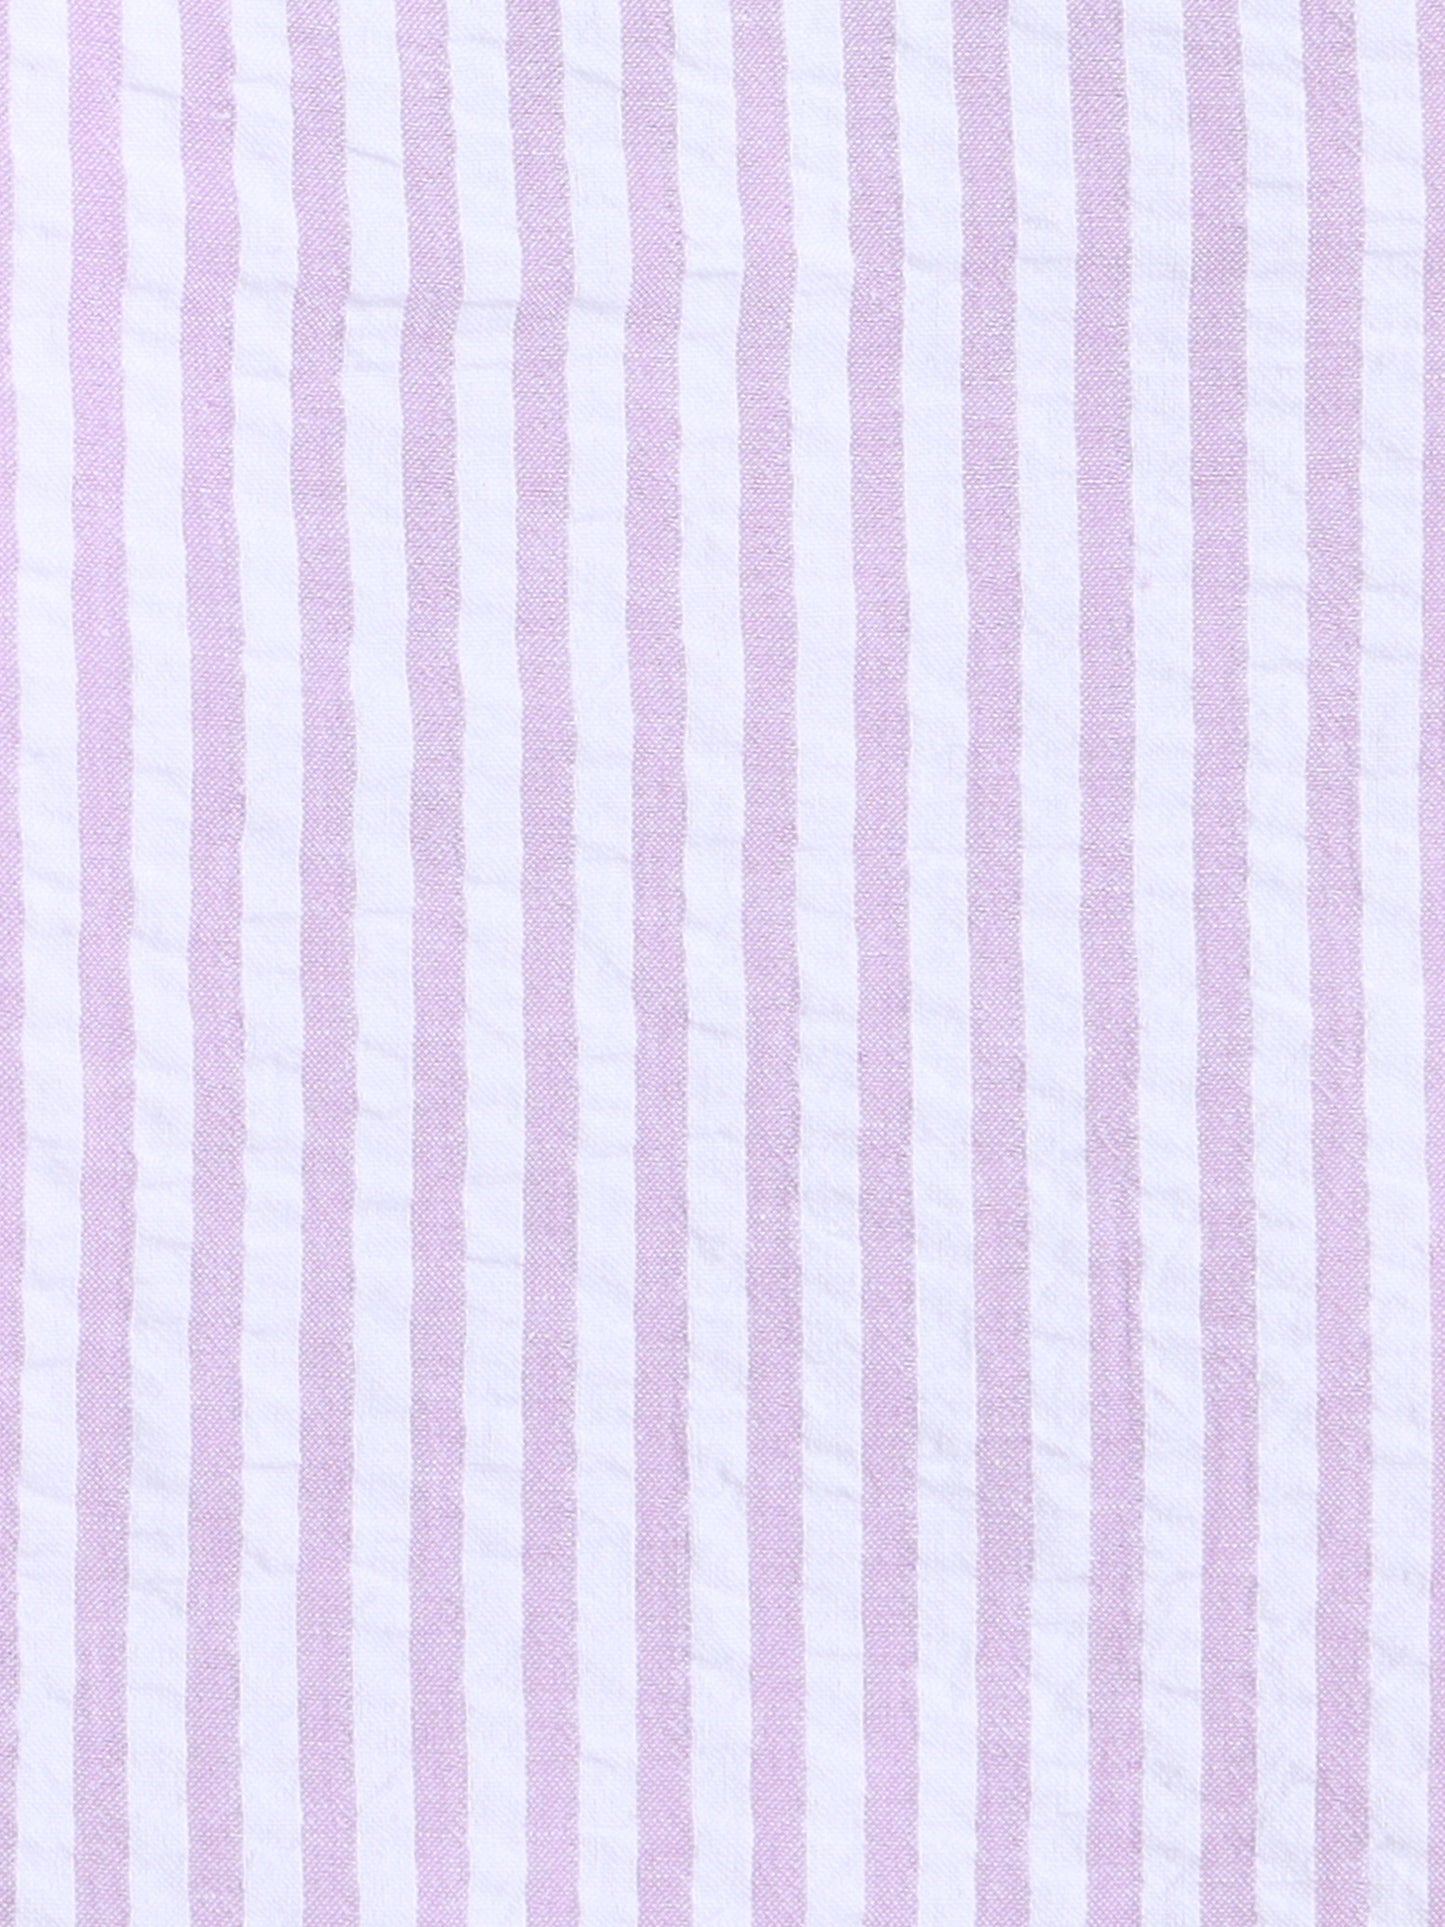 Purple and White Stripes Nightsuit with Unicorn Embroidery on Pocket